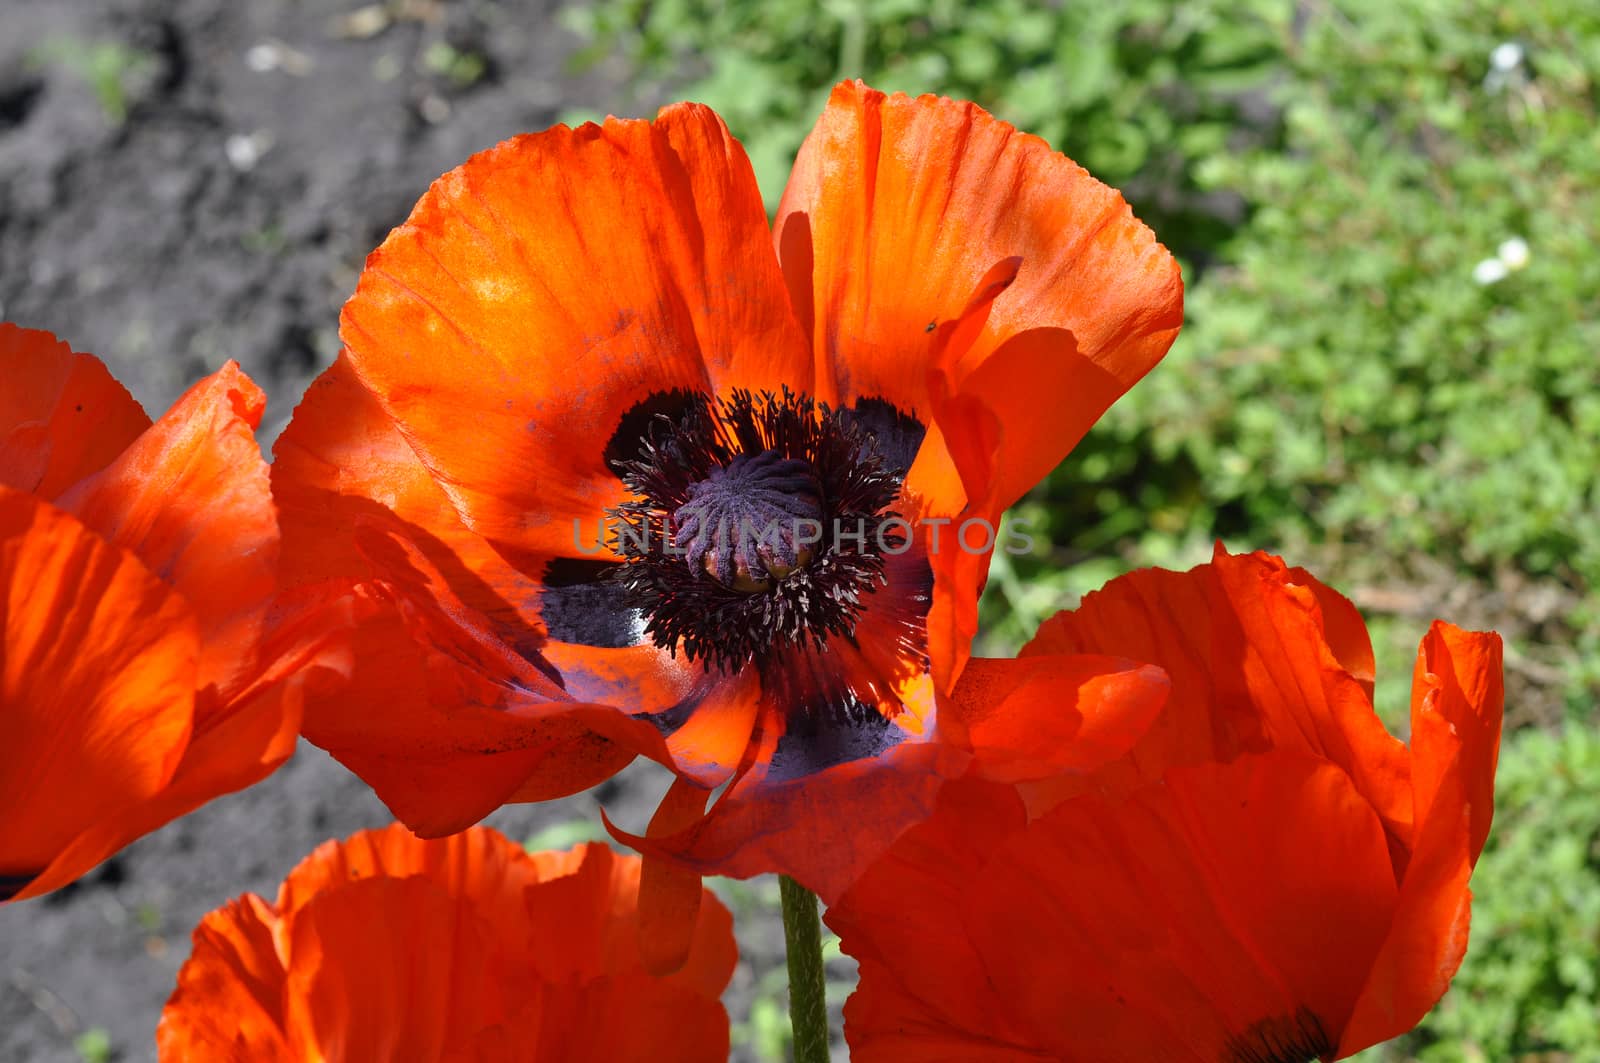 Big red poppies close up. by veronka72